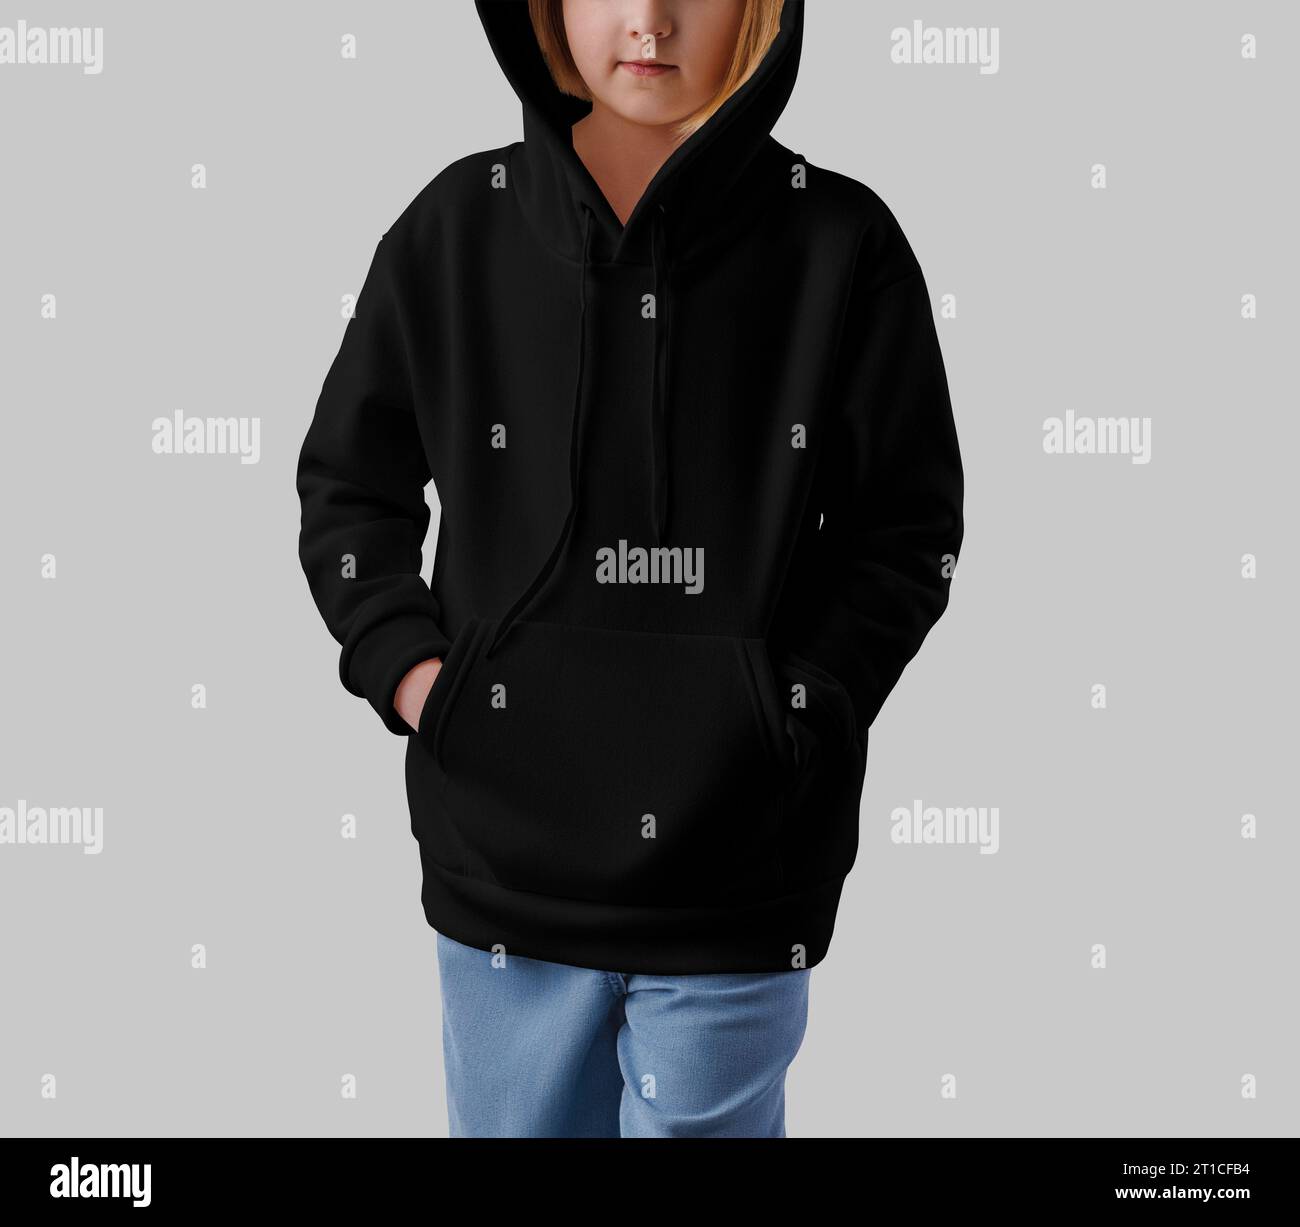 Mockup of a black hoodie on a hooded girl, front view, isolated on background. Template of stylish children's clothing for design, branding. Fashionab Stock Photo